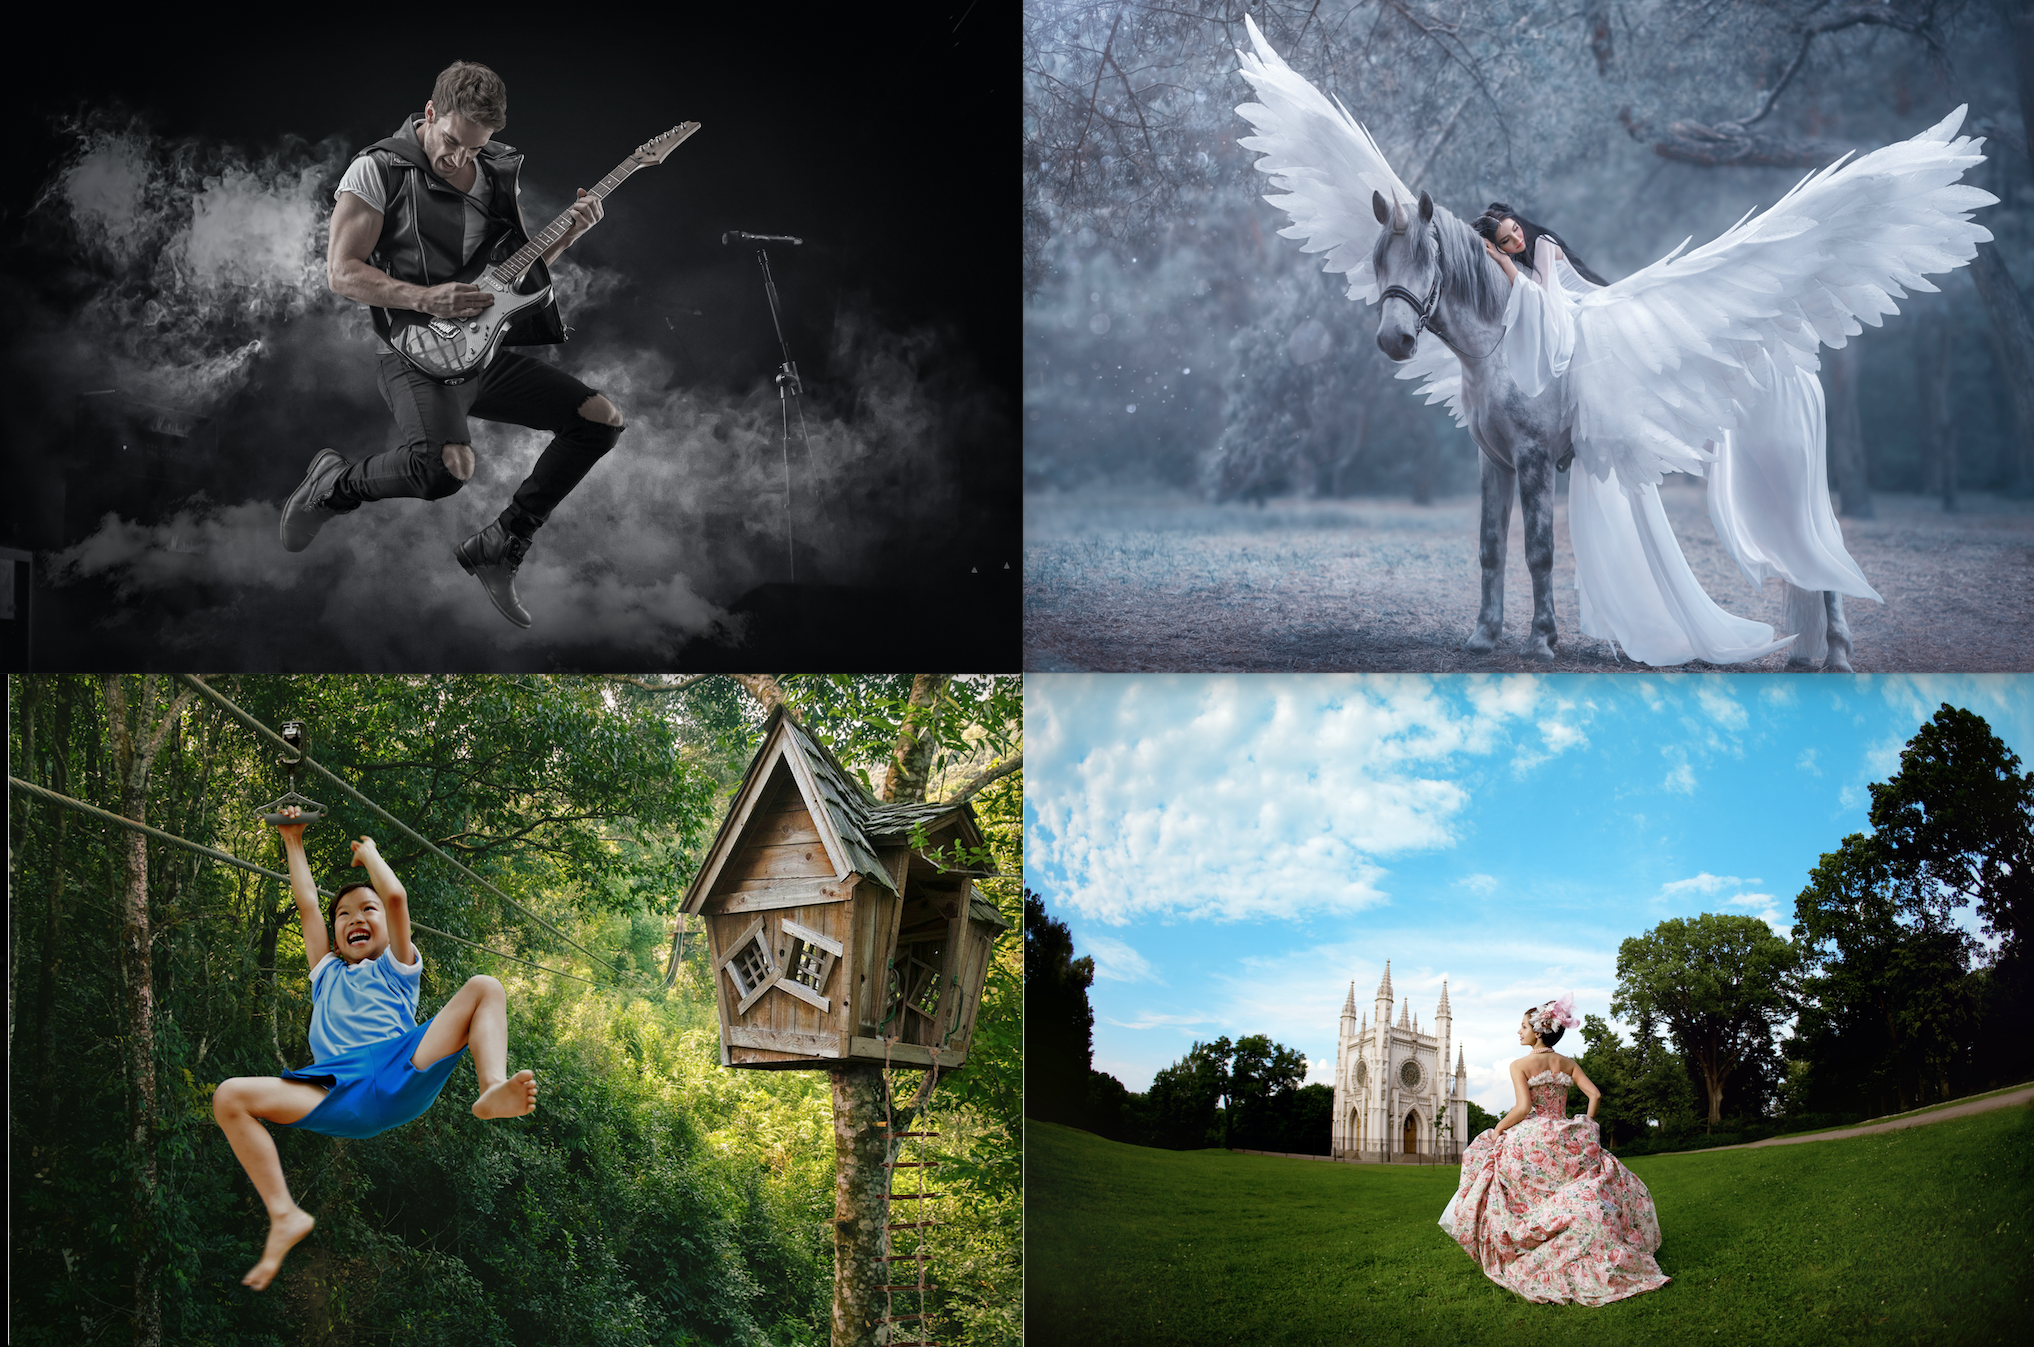 Make Believe lookbook grid. Four images of various make believe situations that are the best, such as being a rockstar, princess, jungle man, or the like. 